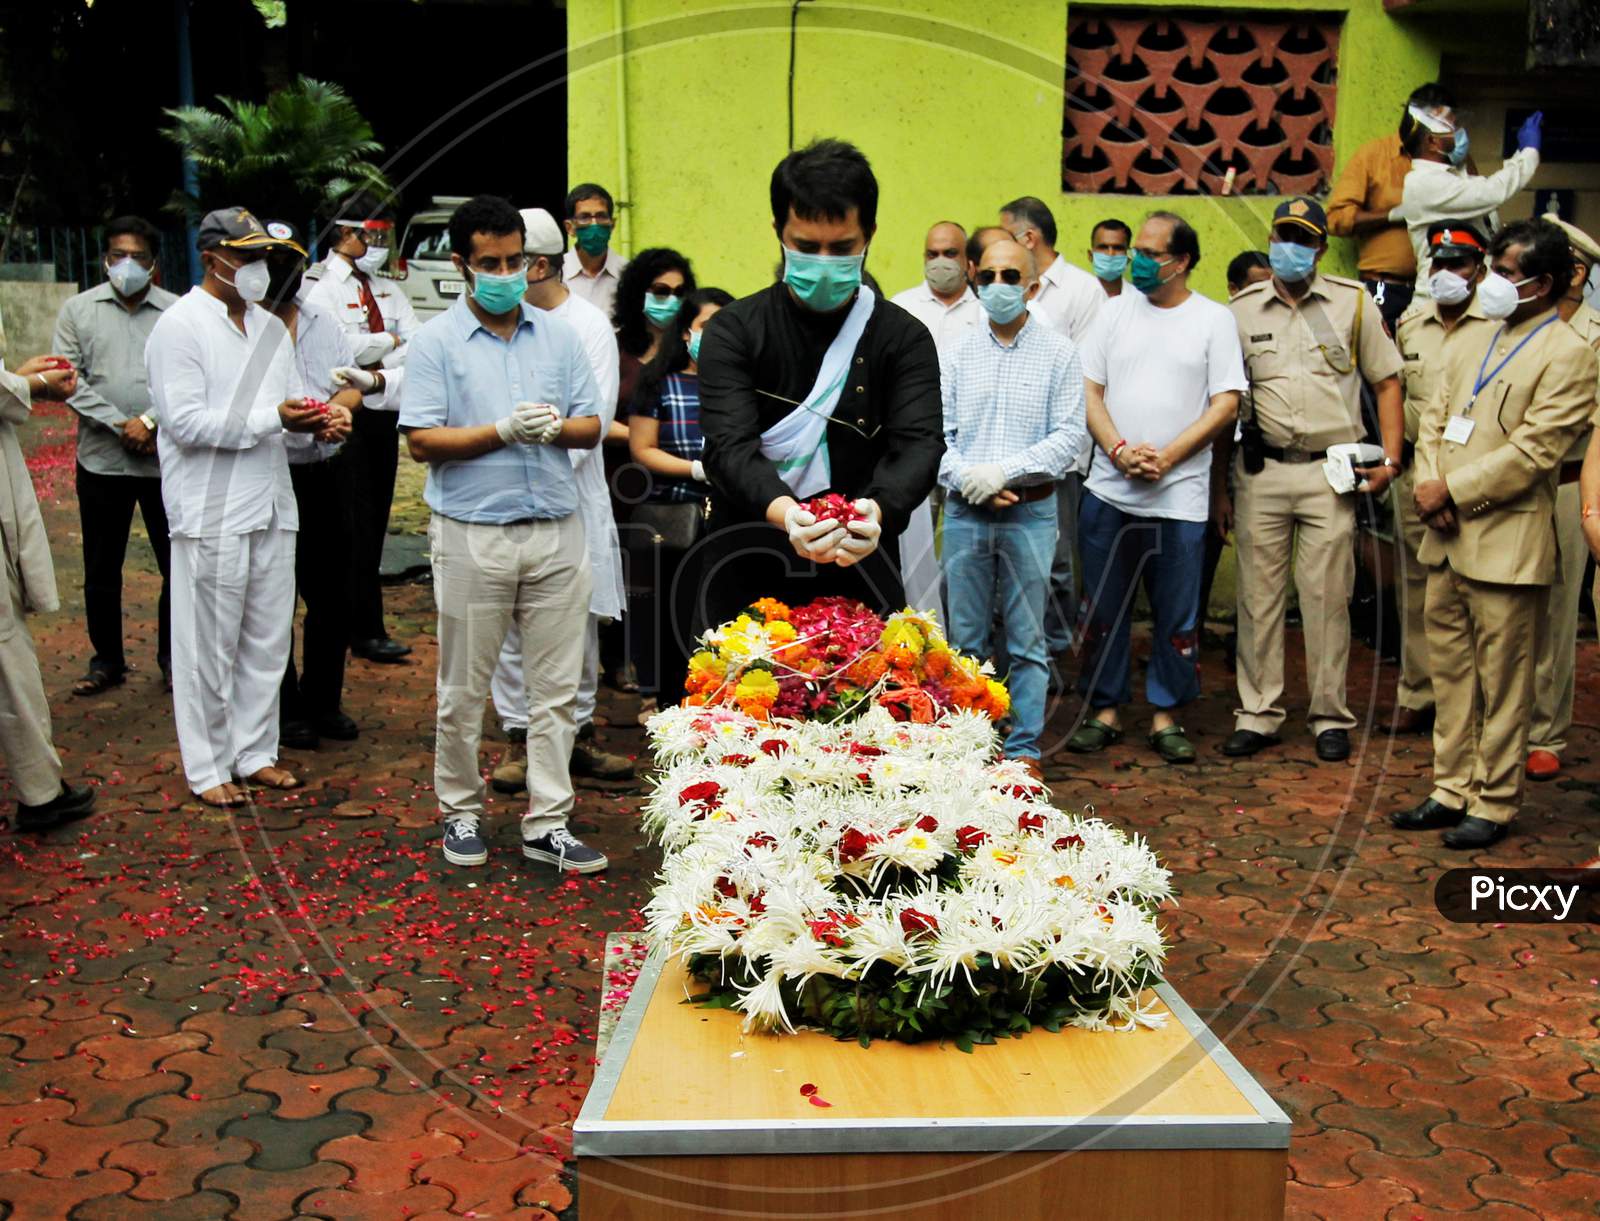 Son of deceased Air India pilot Deepak Sathe places flowers on his coffin during his funeral in Mumbai, India on August 11, 2020.